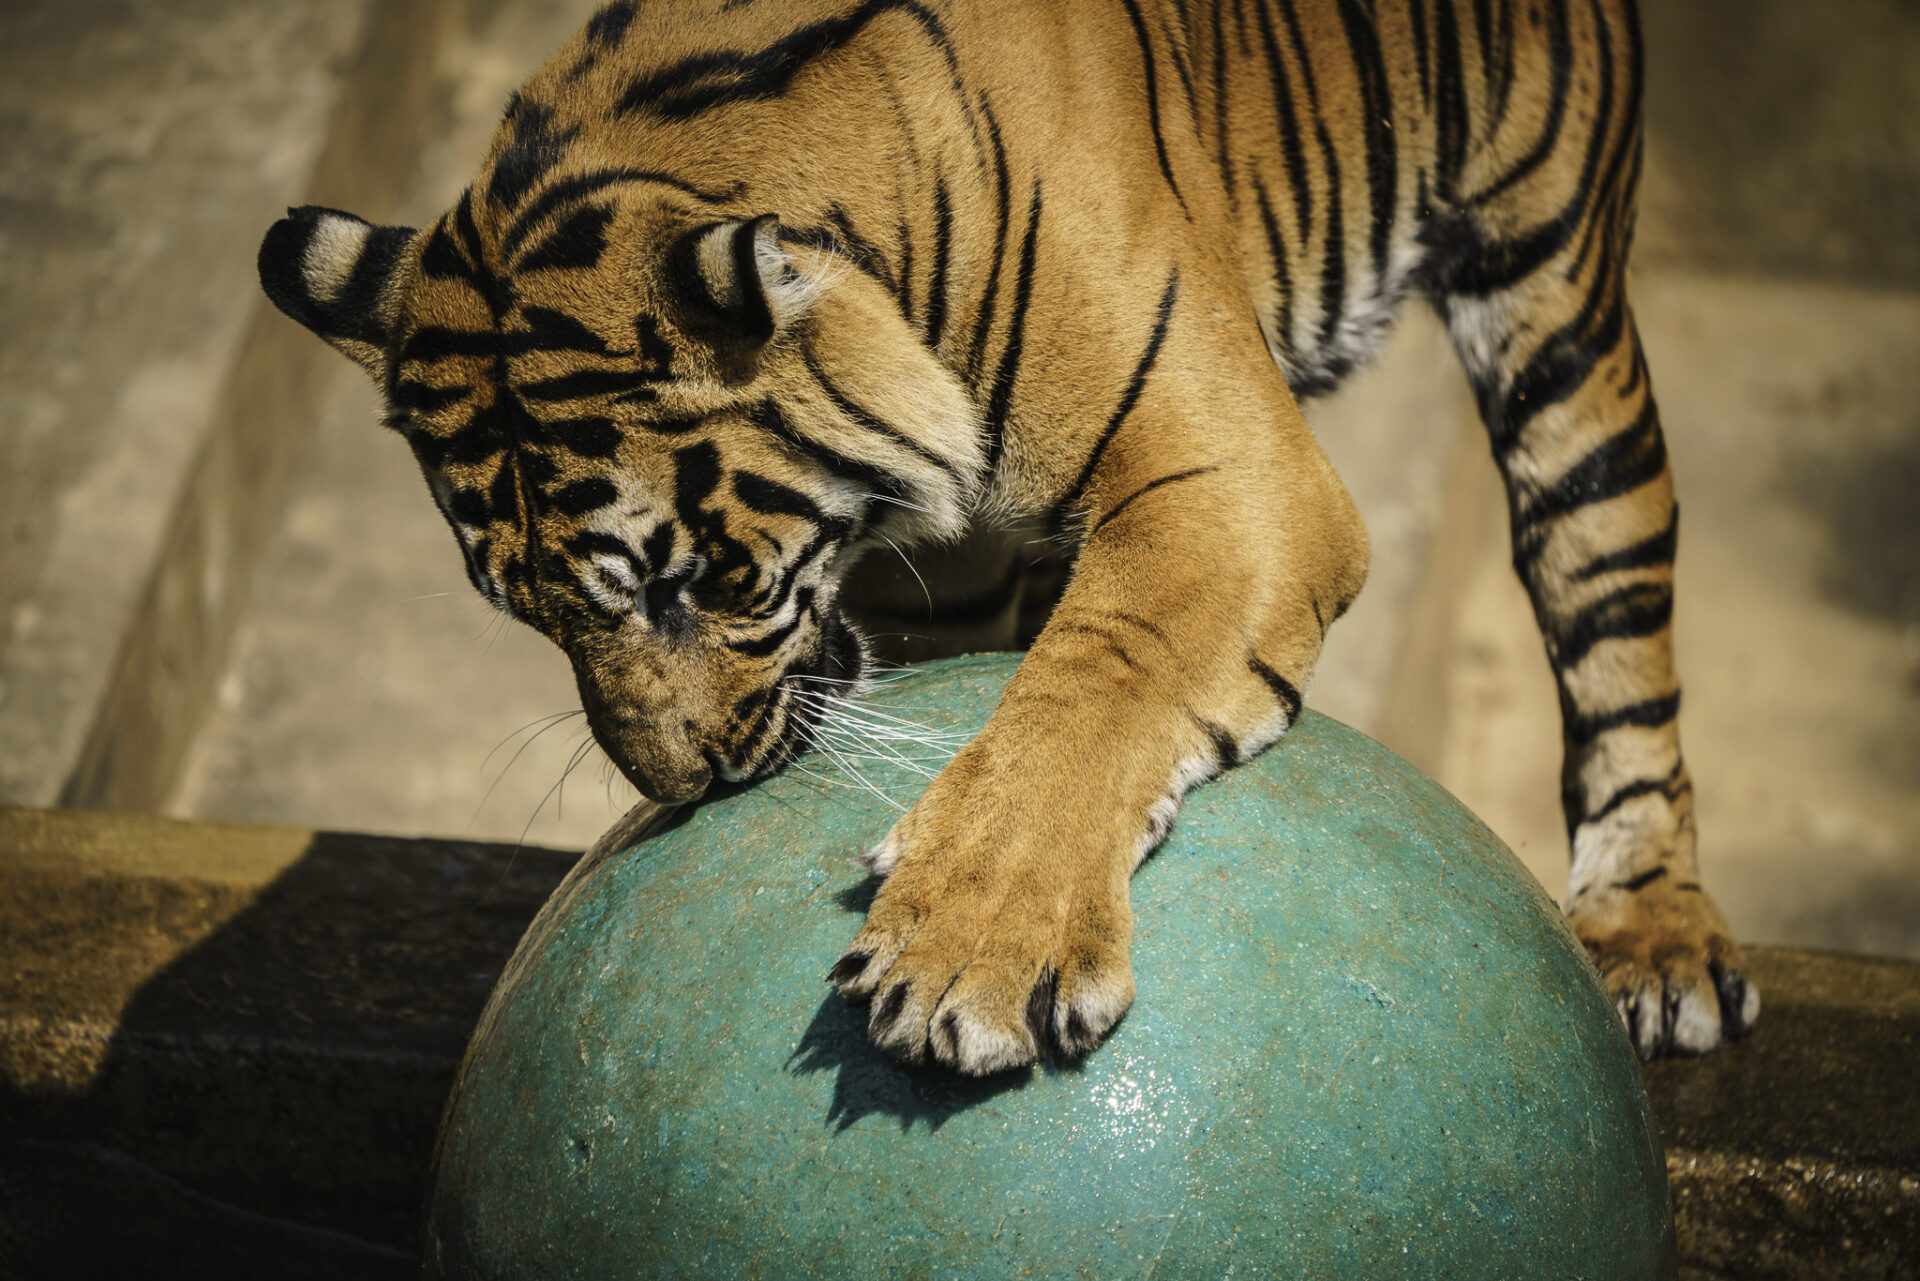 Tiger Plays with Large Ball at National Zoo